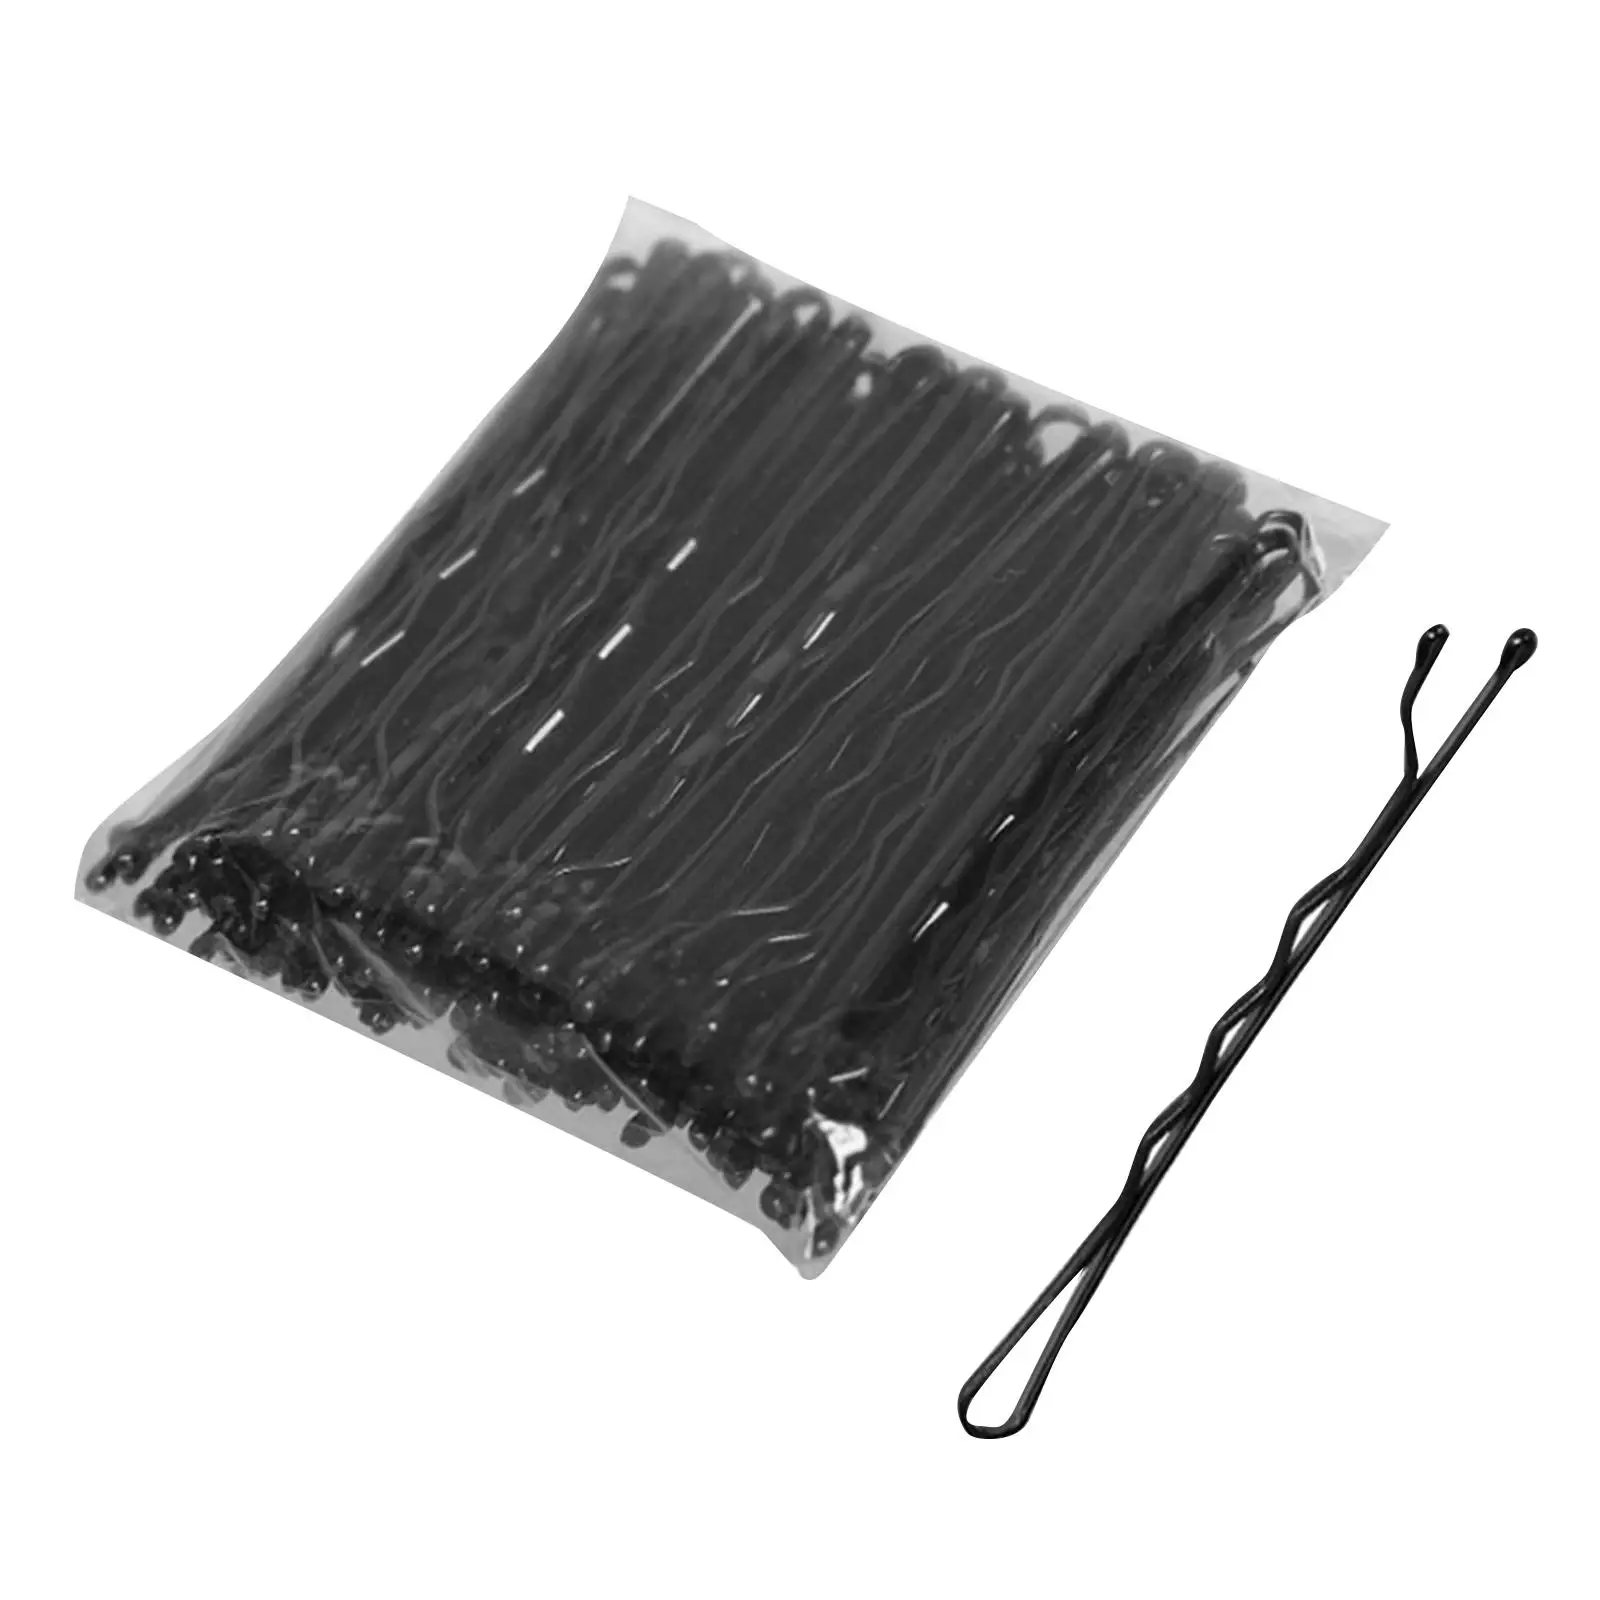 100x Hair Pin Keep Hairs in Place Fit All Hair Types Crimpled Slideproof Hair Accessories for Hairdressing Salon Girls Lady